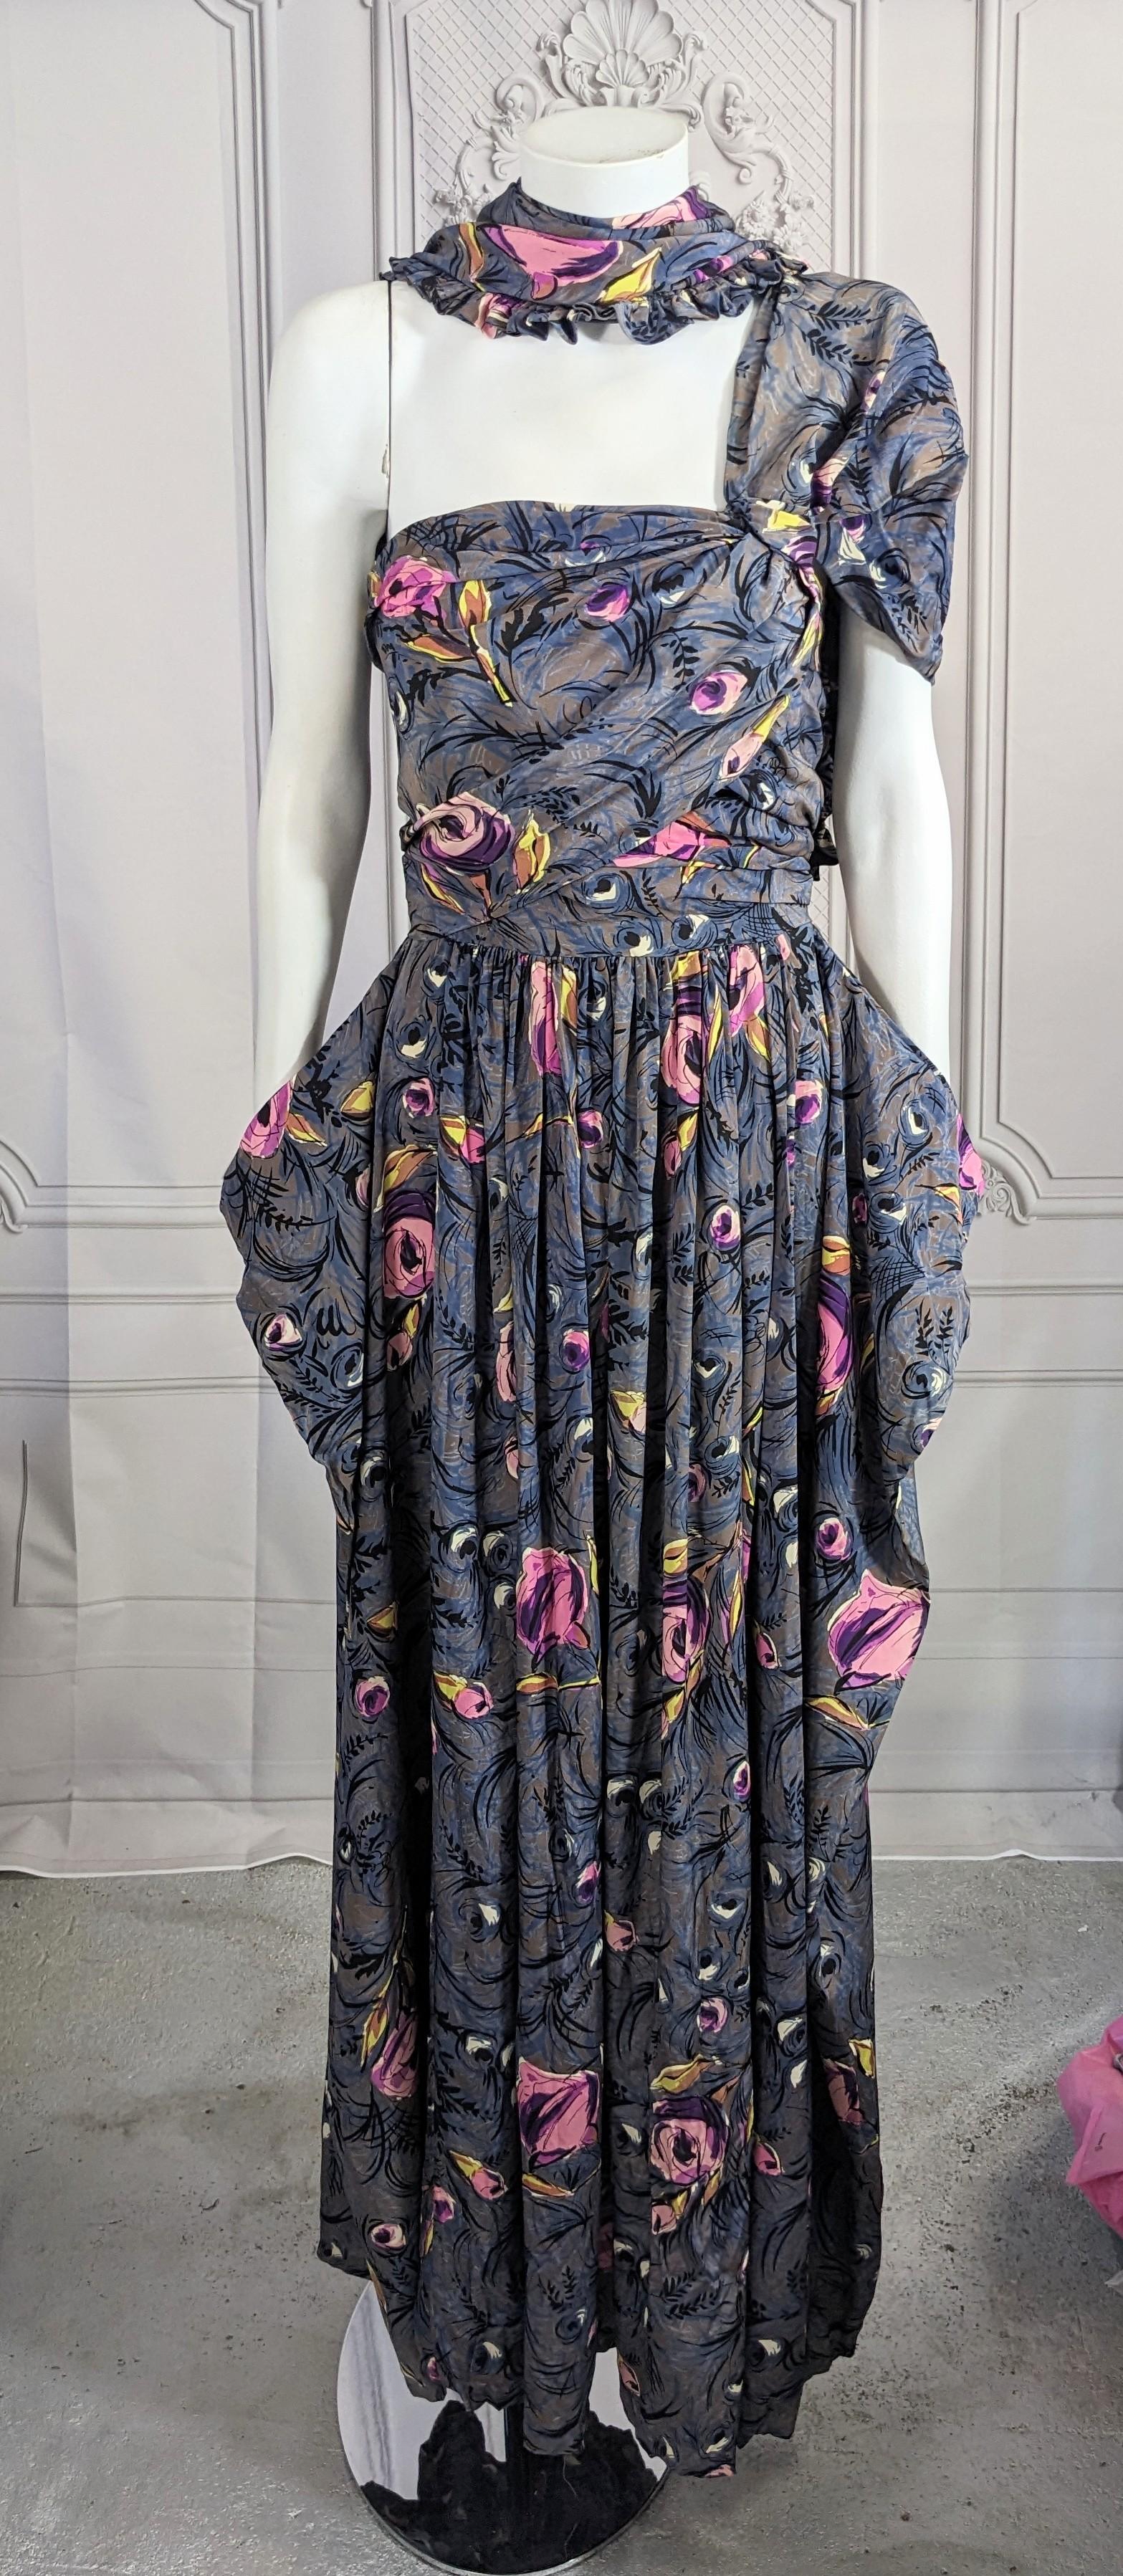 Elegant 1940's Draped Silk Crepe One Shoulder Gown with ruffled scarf. Draped bodice extends into shoulder with bralette stitched inside for support. Full skirt with panels at each side which drape. Silk crepe Retro floral print. Size 0-2. 1940's